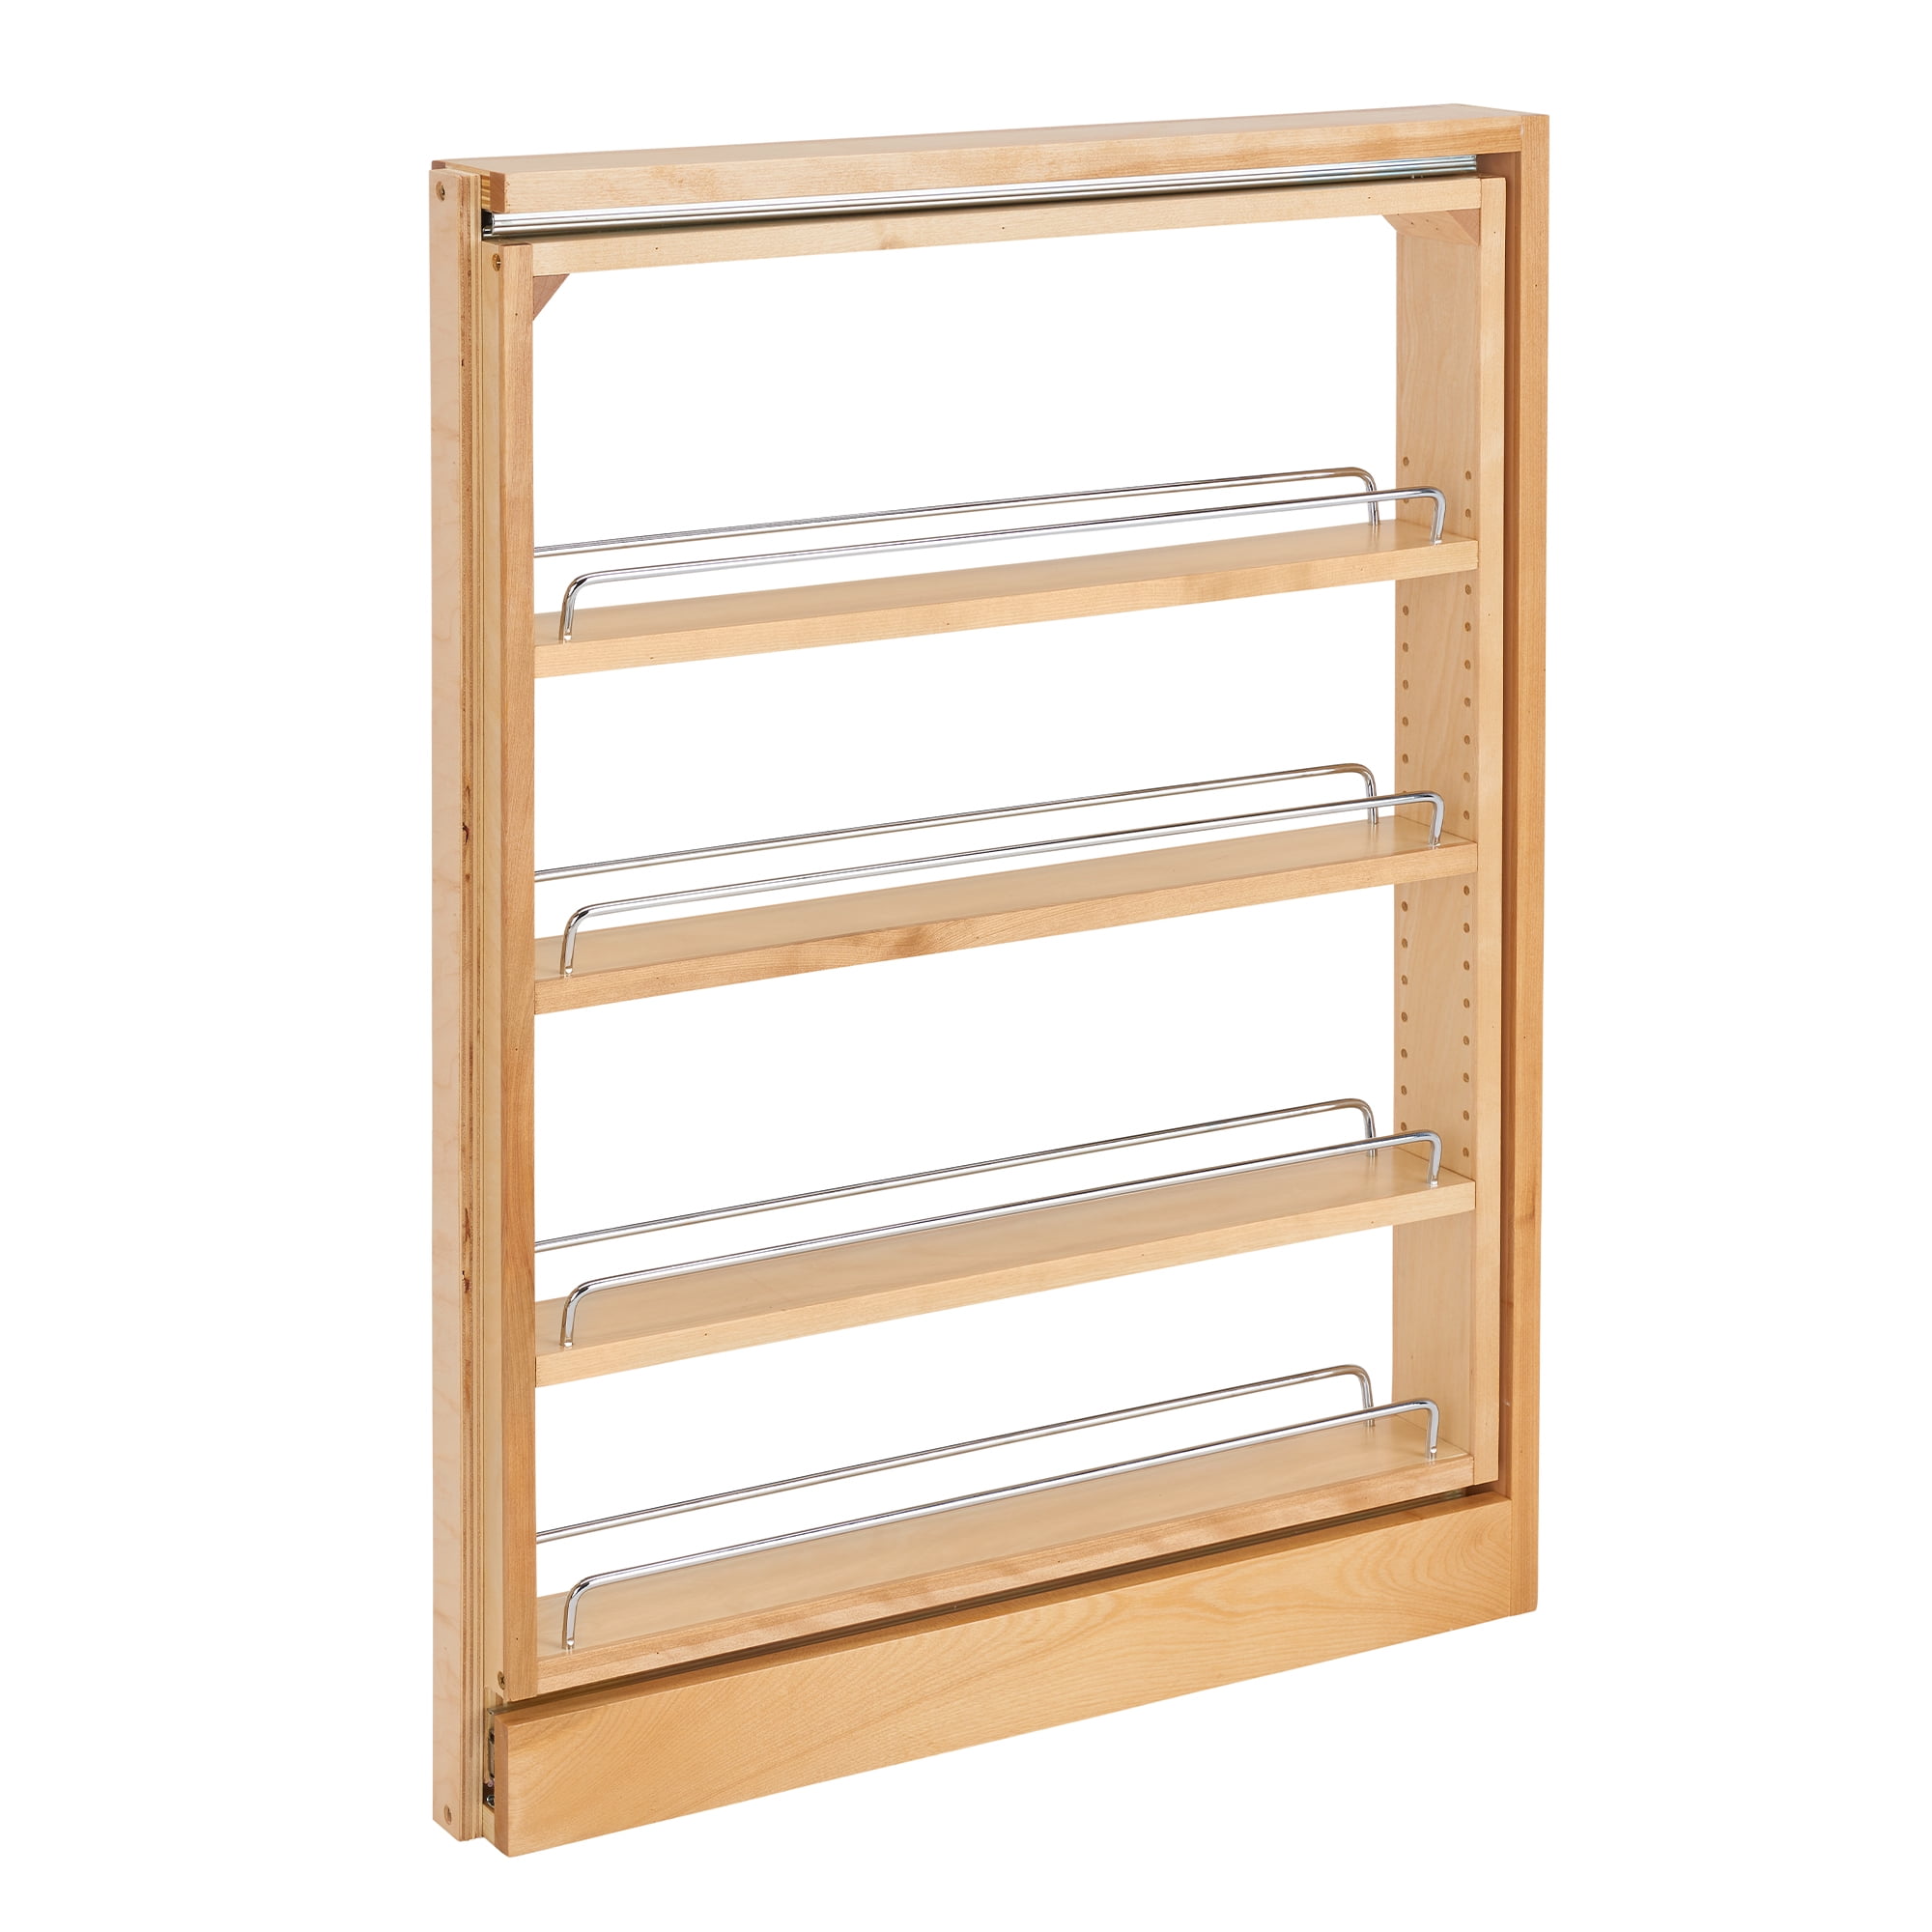  WHIFEA 2 Tier Pull-Out Cabinet Organizer Drop Down